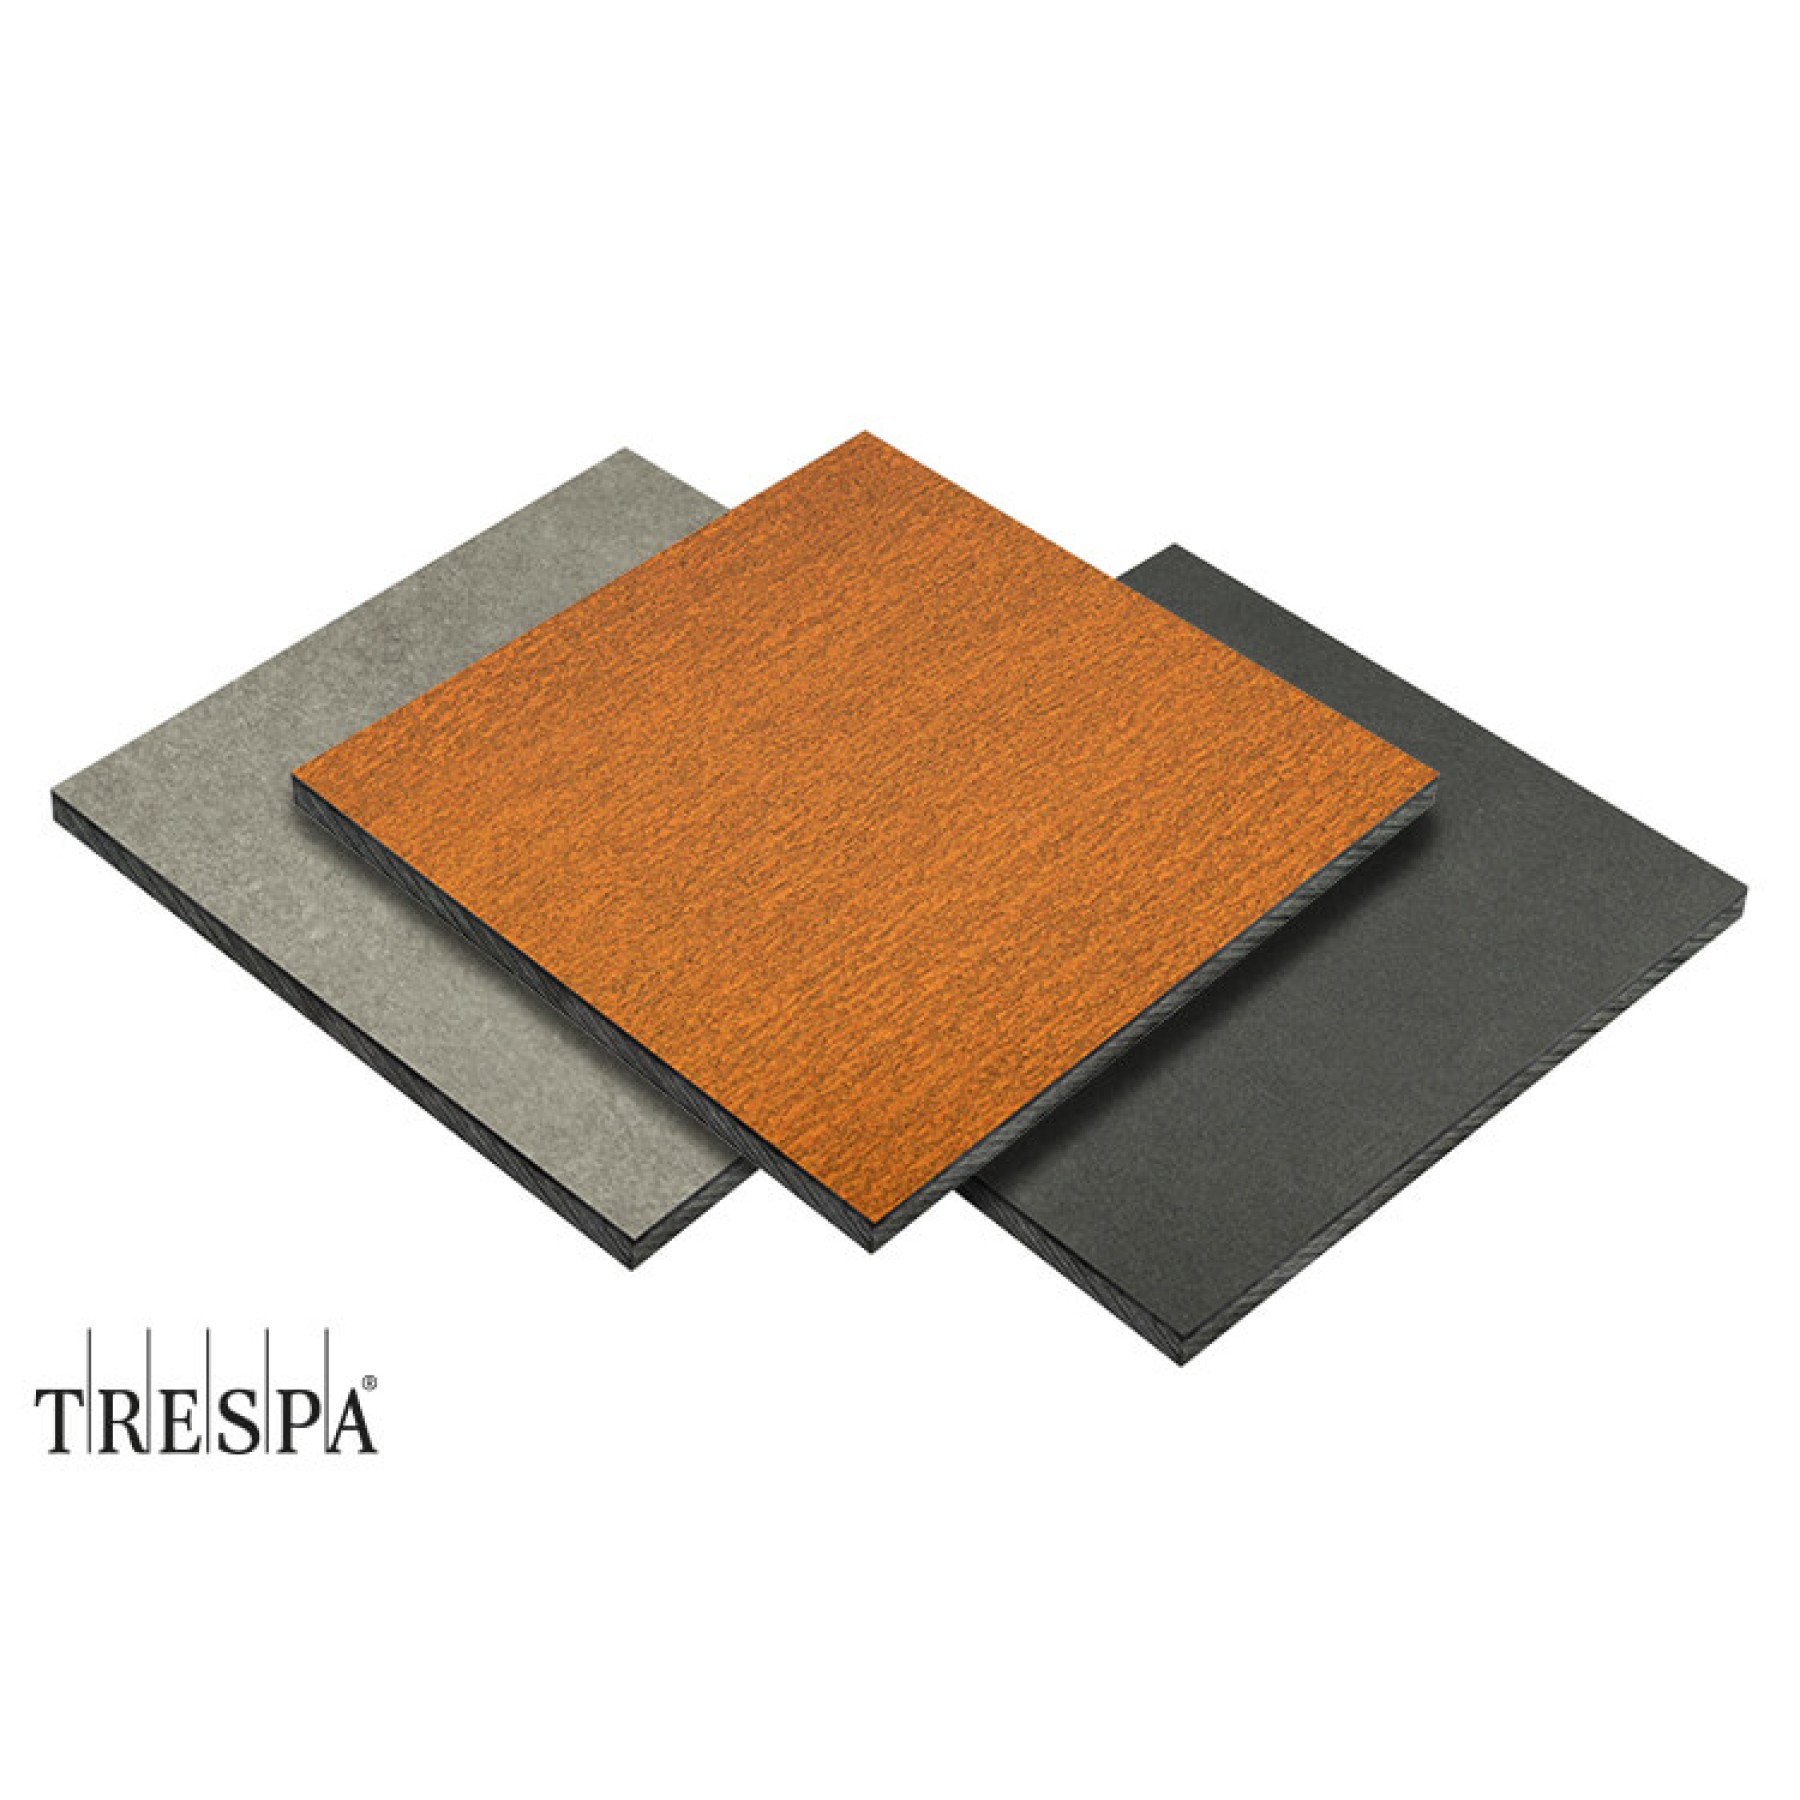 Trespa® Meteon® FR FR NATURALS HPL sheets in various natural stone and metal decors with matt surface on both sides